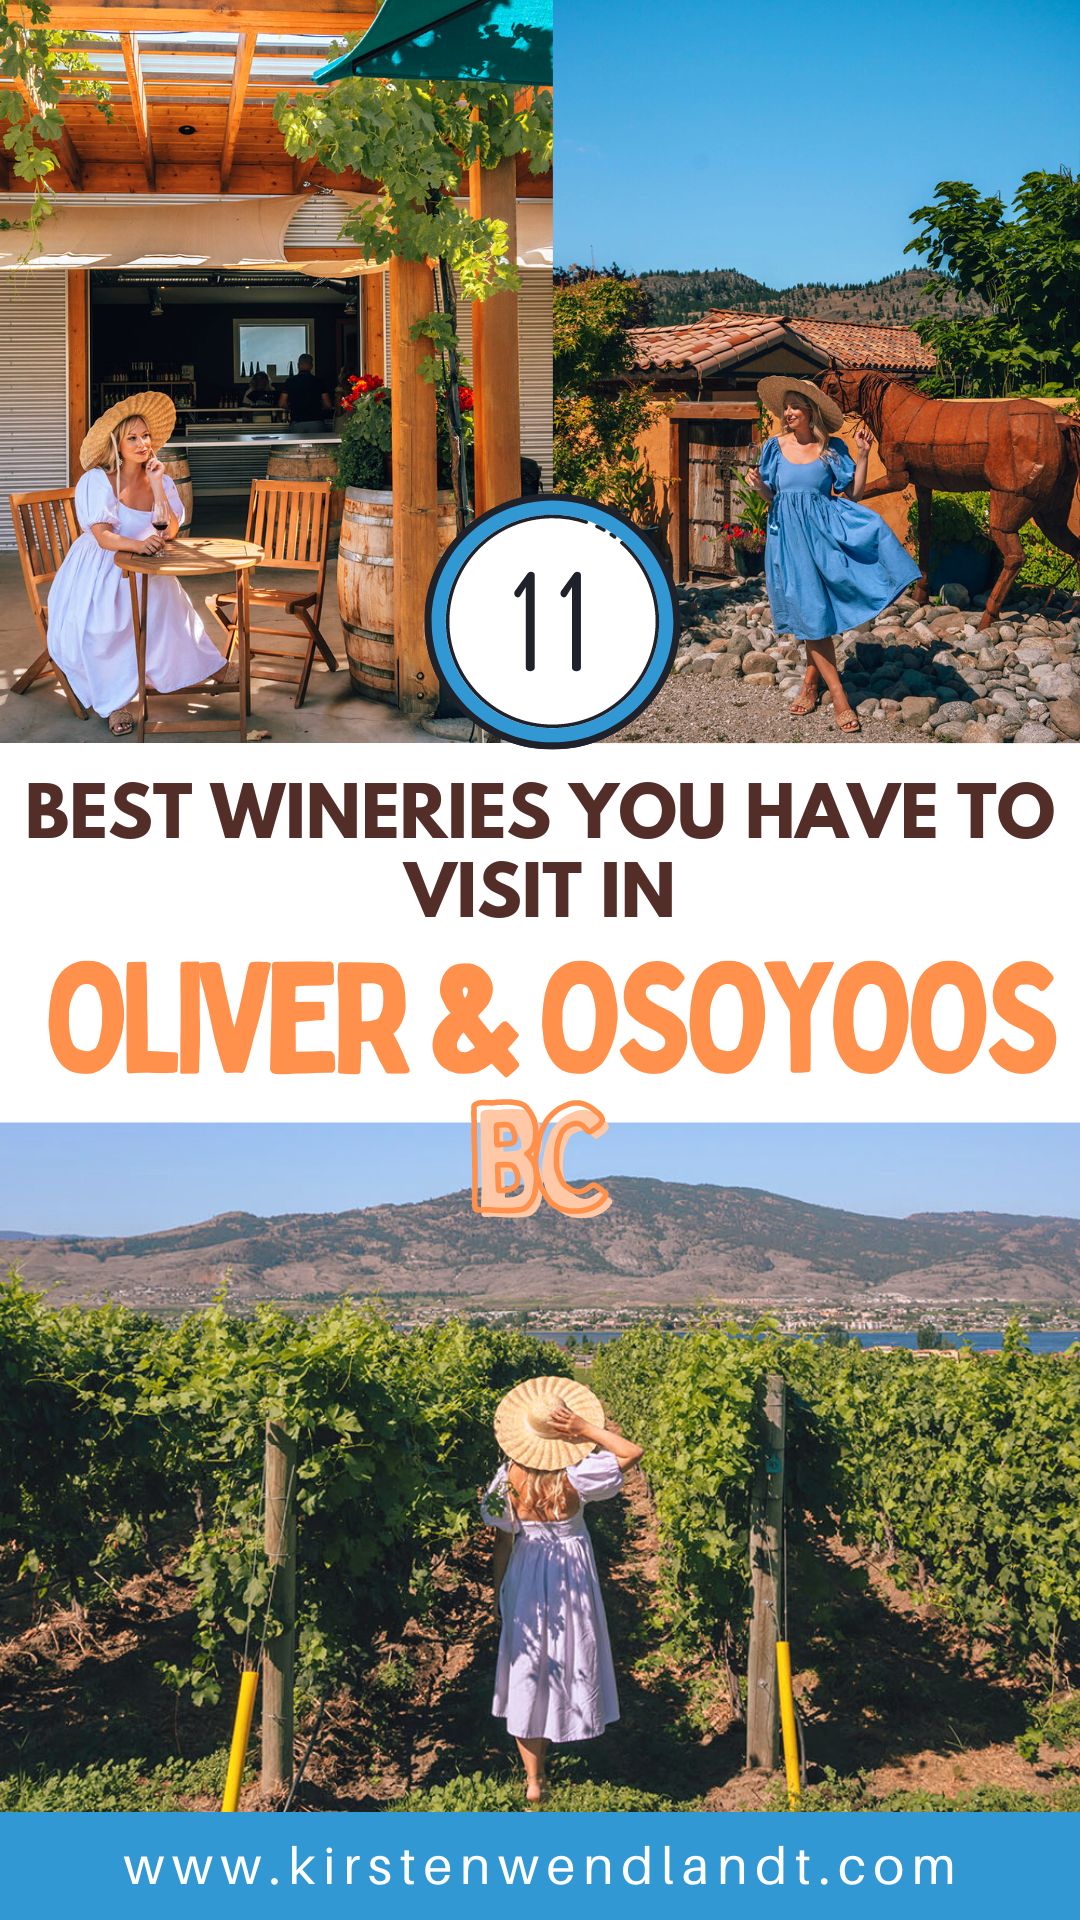 Planning a visit to the Oliver & Osoyoos regions of the Okanagan soon? You don't want to miss this guide to the best wineries in Oliver & Osoyoos! This guide is divided into the best wineries in Oliver and the best wineries in Osoyoos to help make planning your wine tasting route easy. Get ready to enjoy some of the Okanagan’s best wineries!